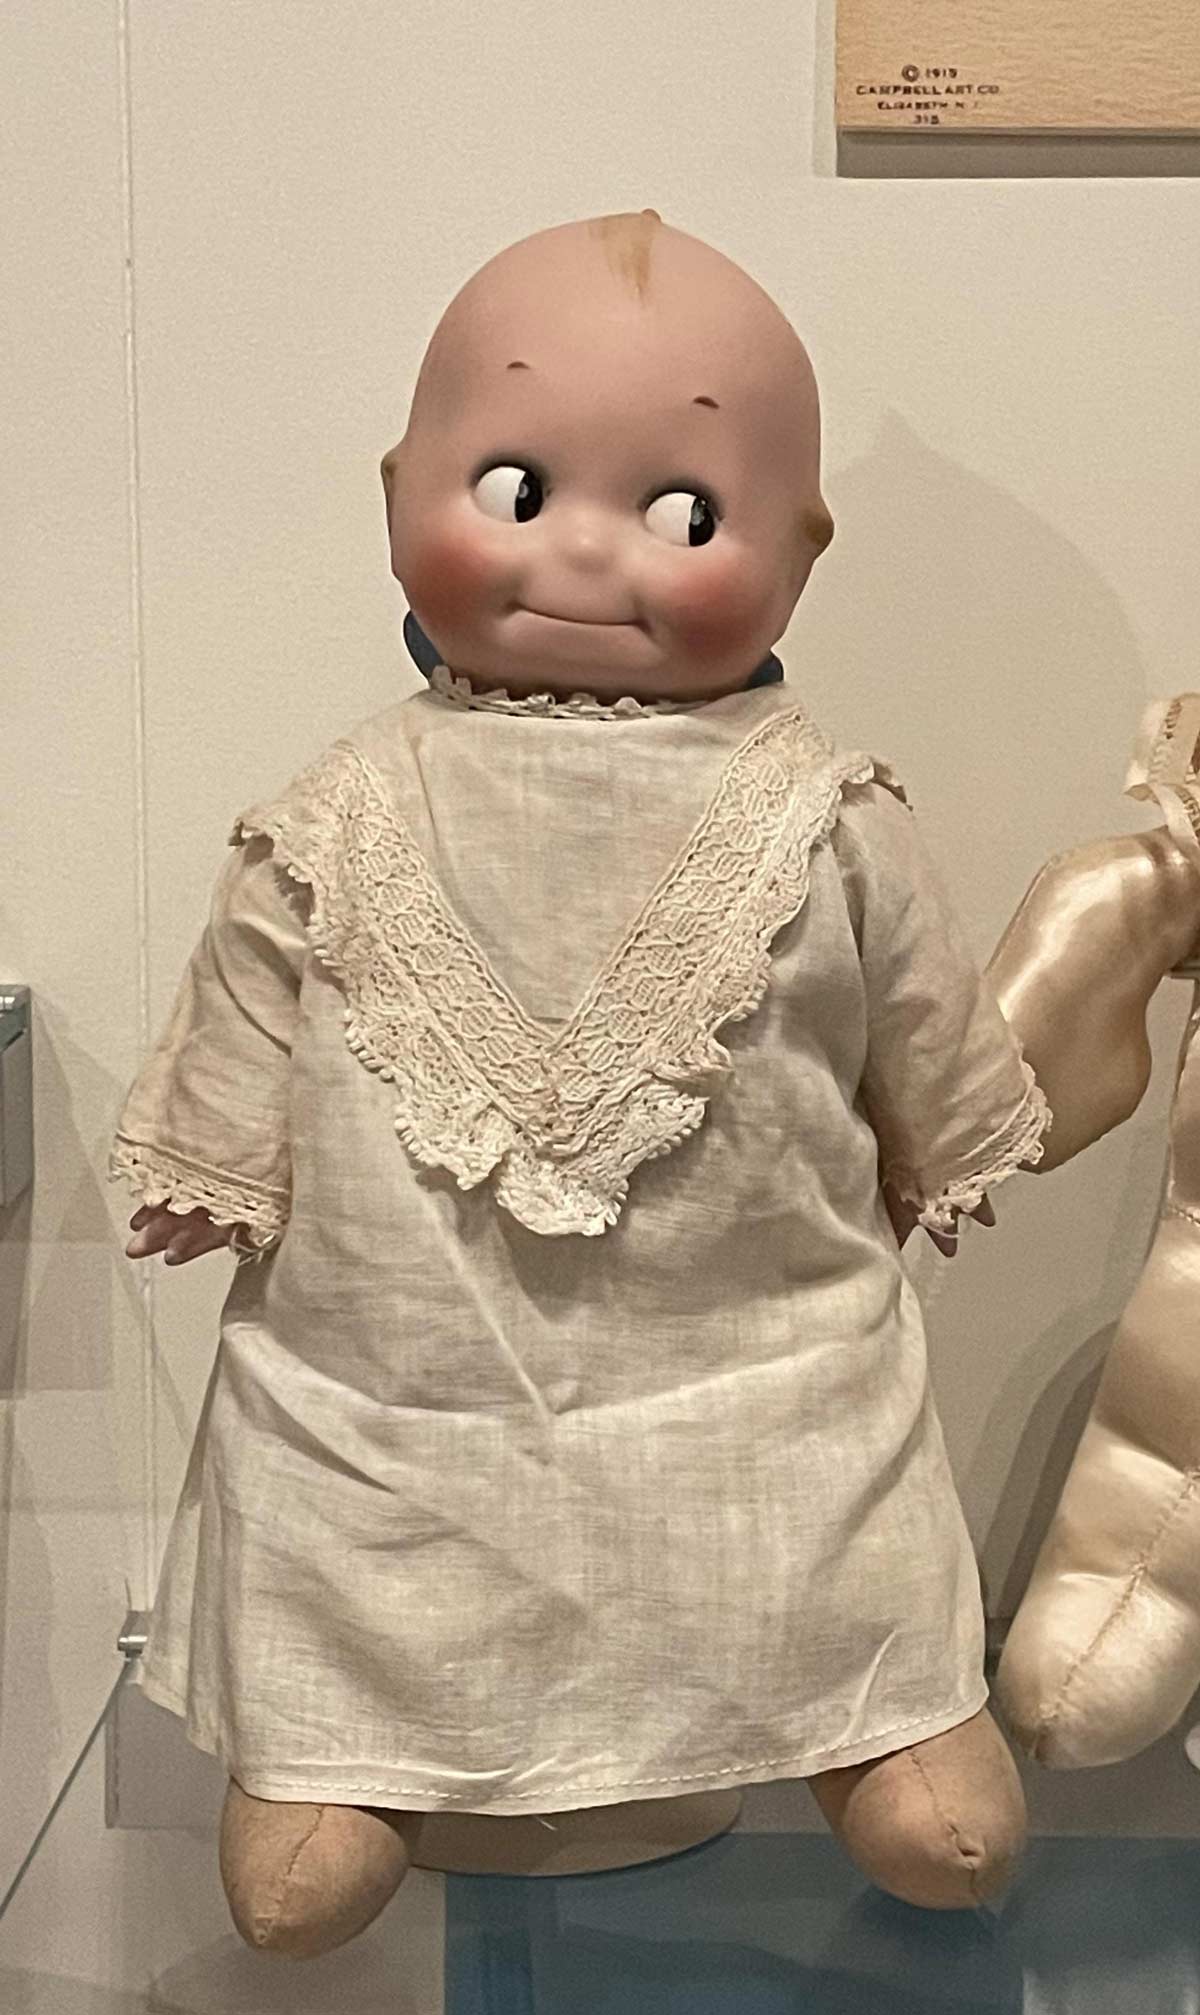 This doll’s face